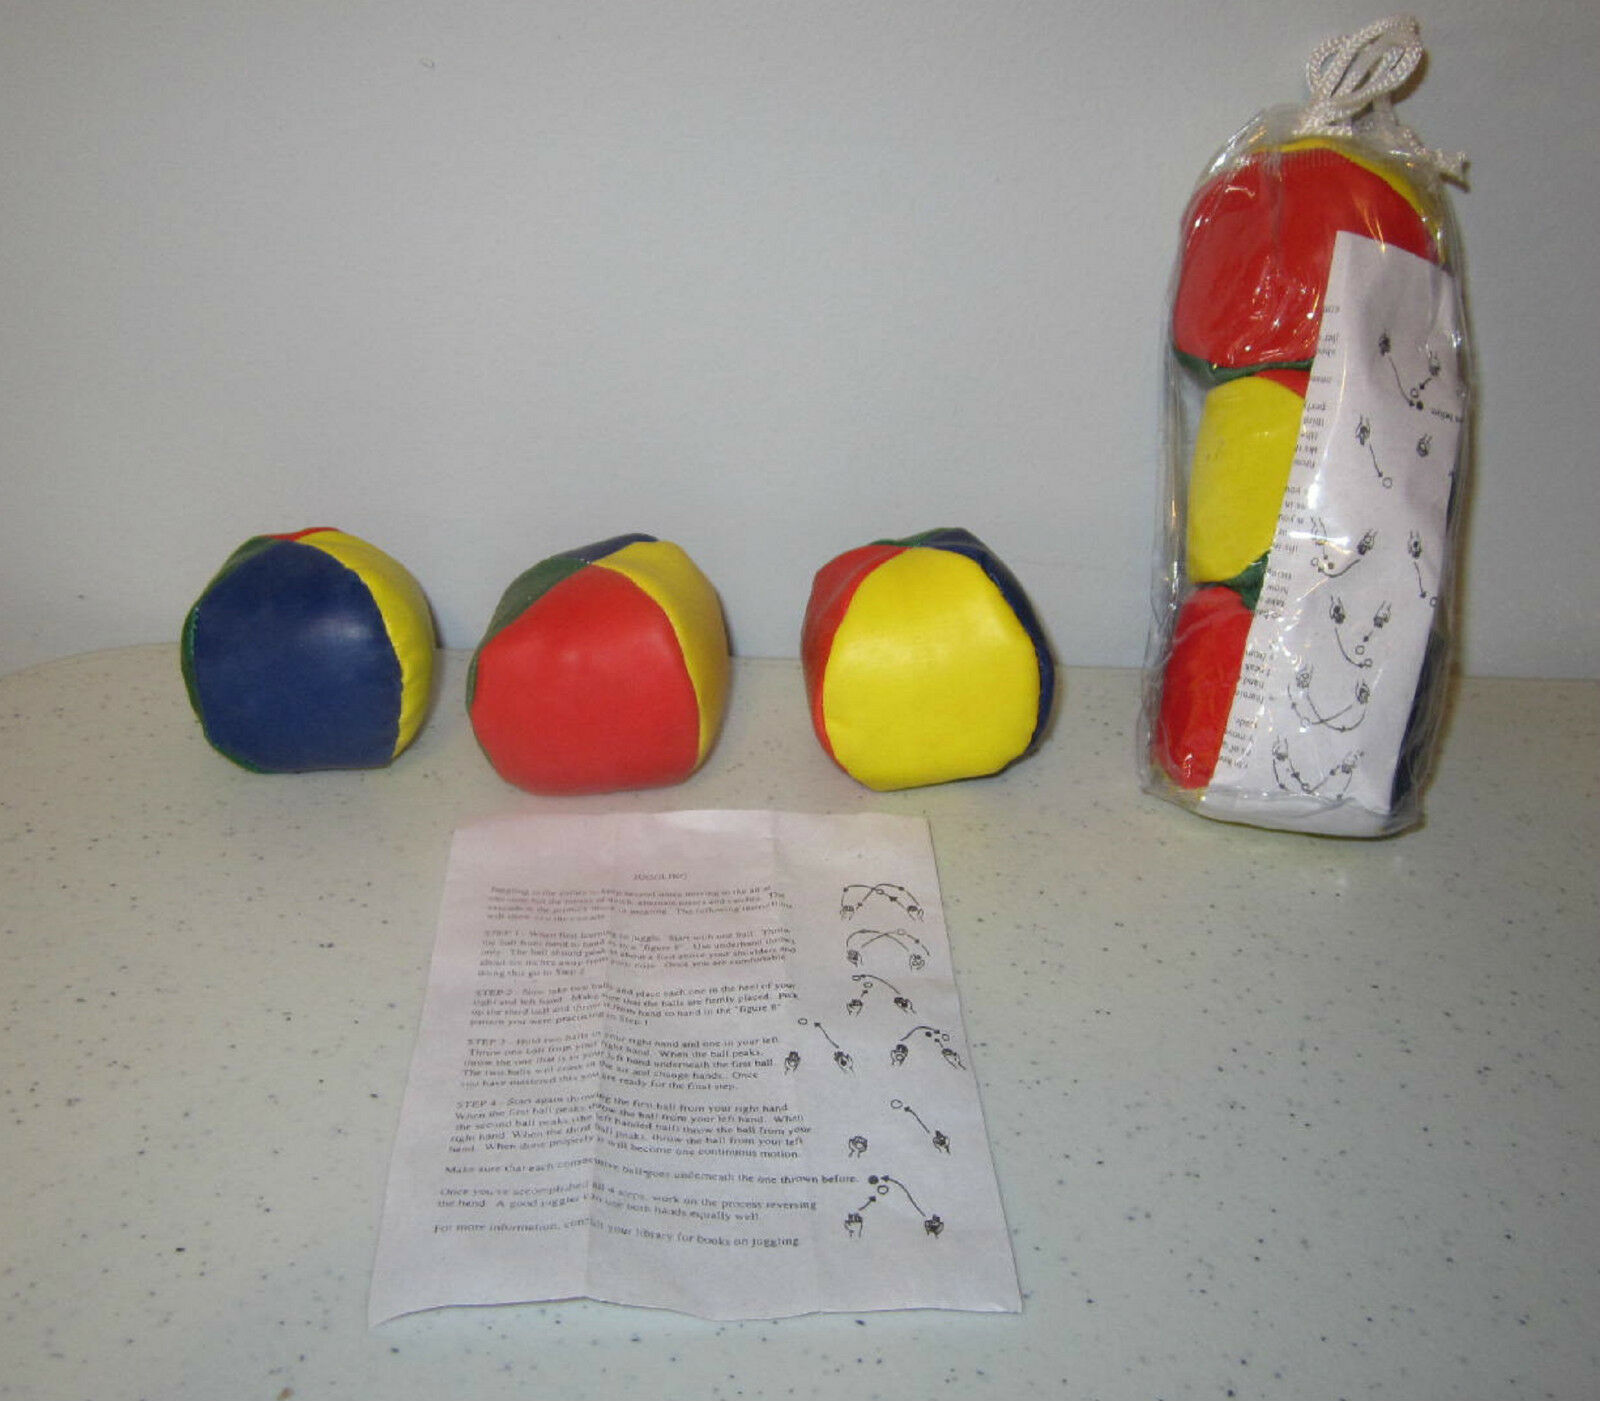 3 MULTI-COLORED JUGGLING BALLS WITH INSTRUCTIONS KIDS BEGGINER JUGGLE BALL KIT